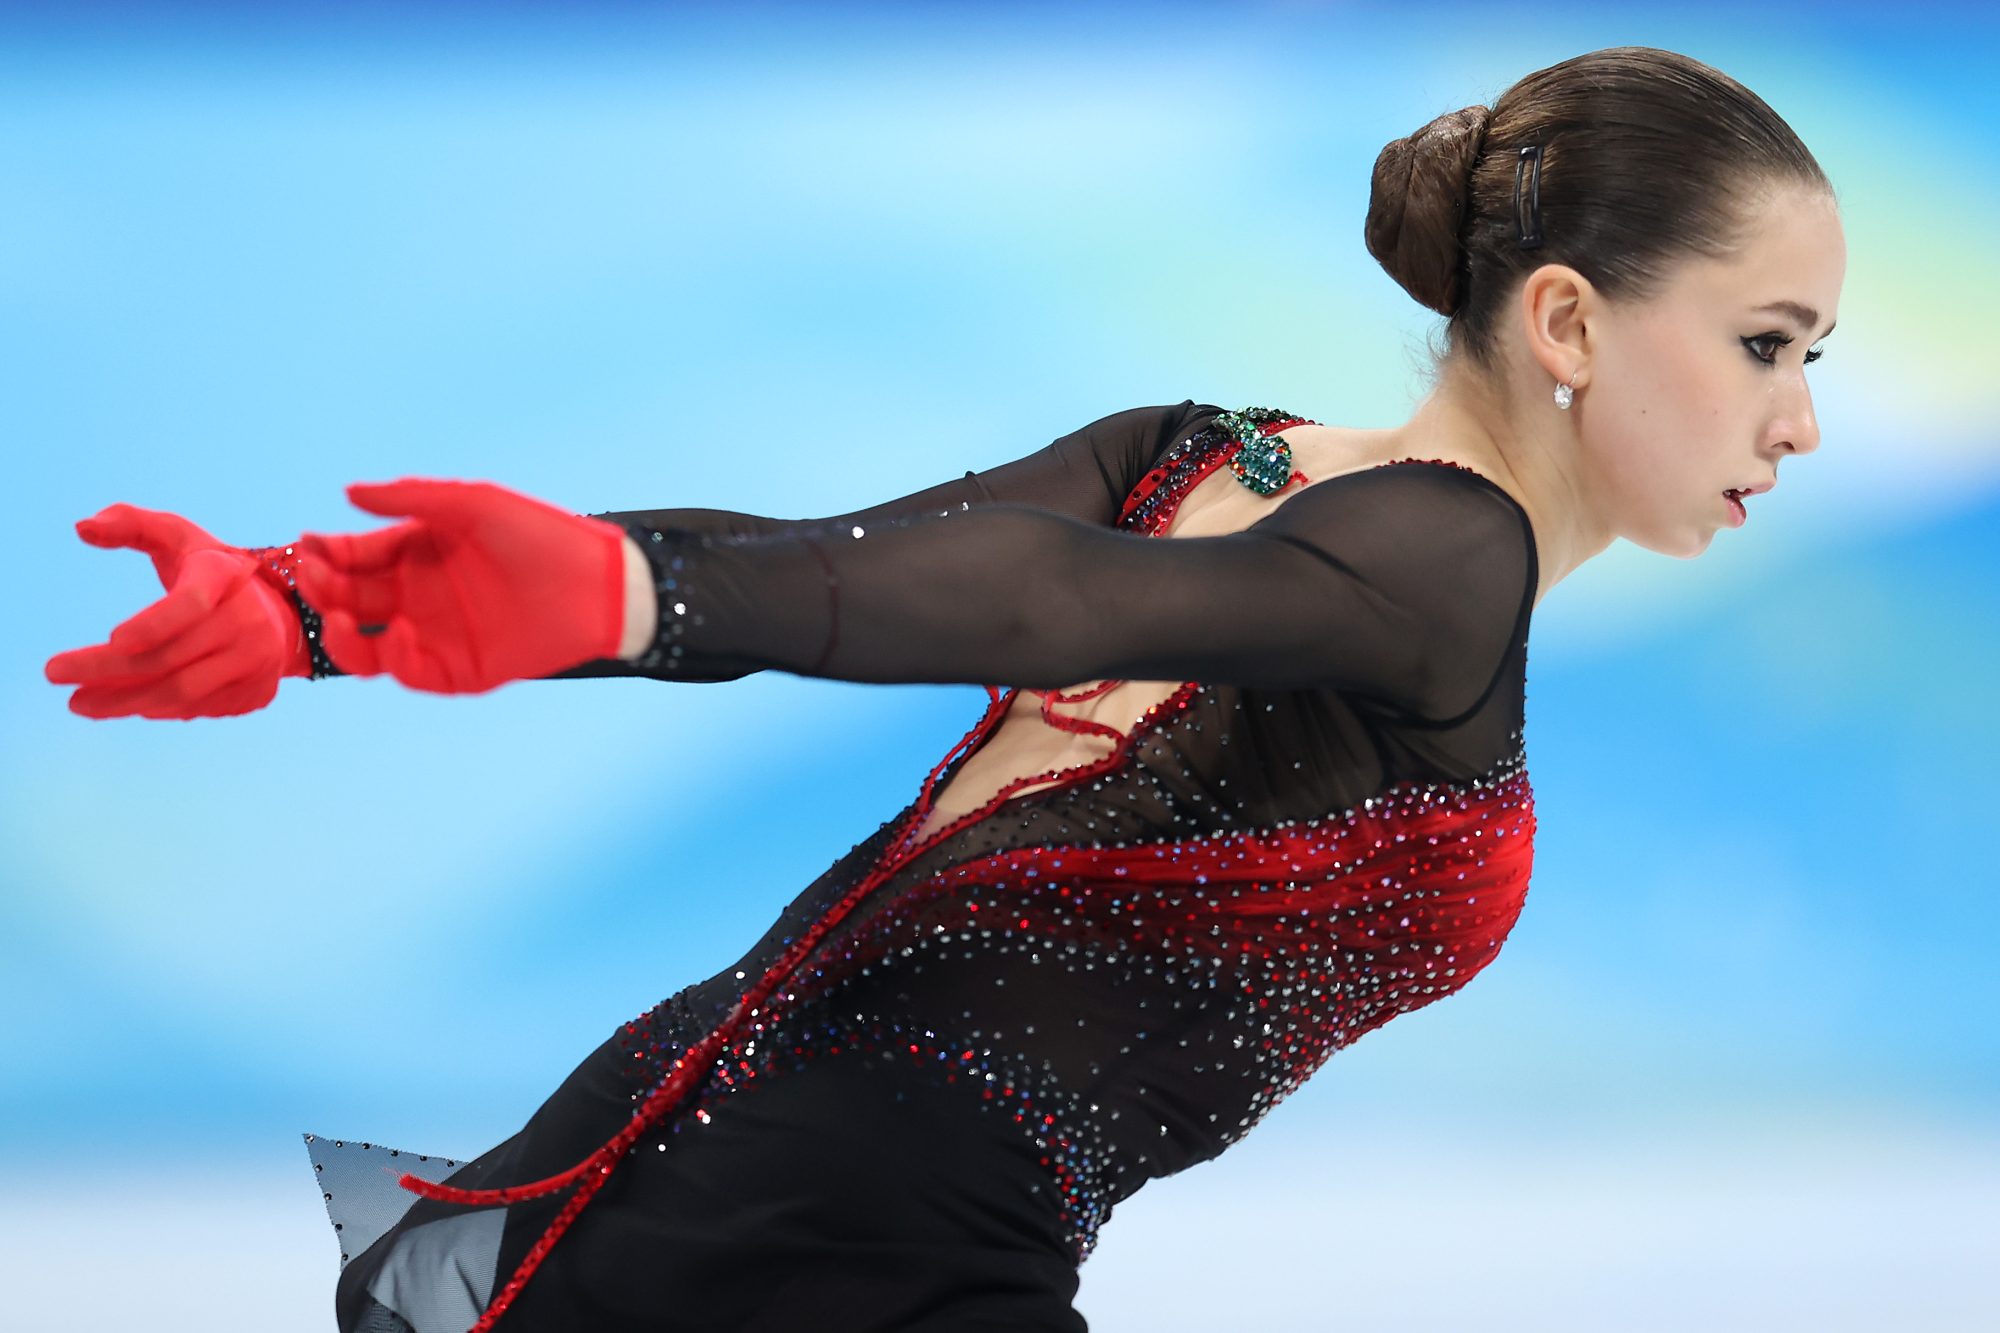 Provisional 2022 Olympic Champion Kamila Valieva Stains Meteoric Skating Career During Russia Doping Scam